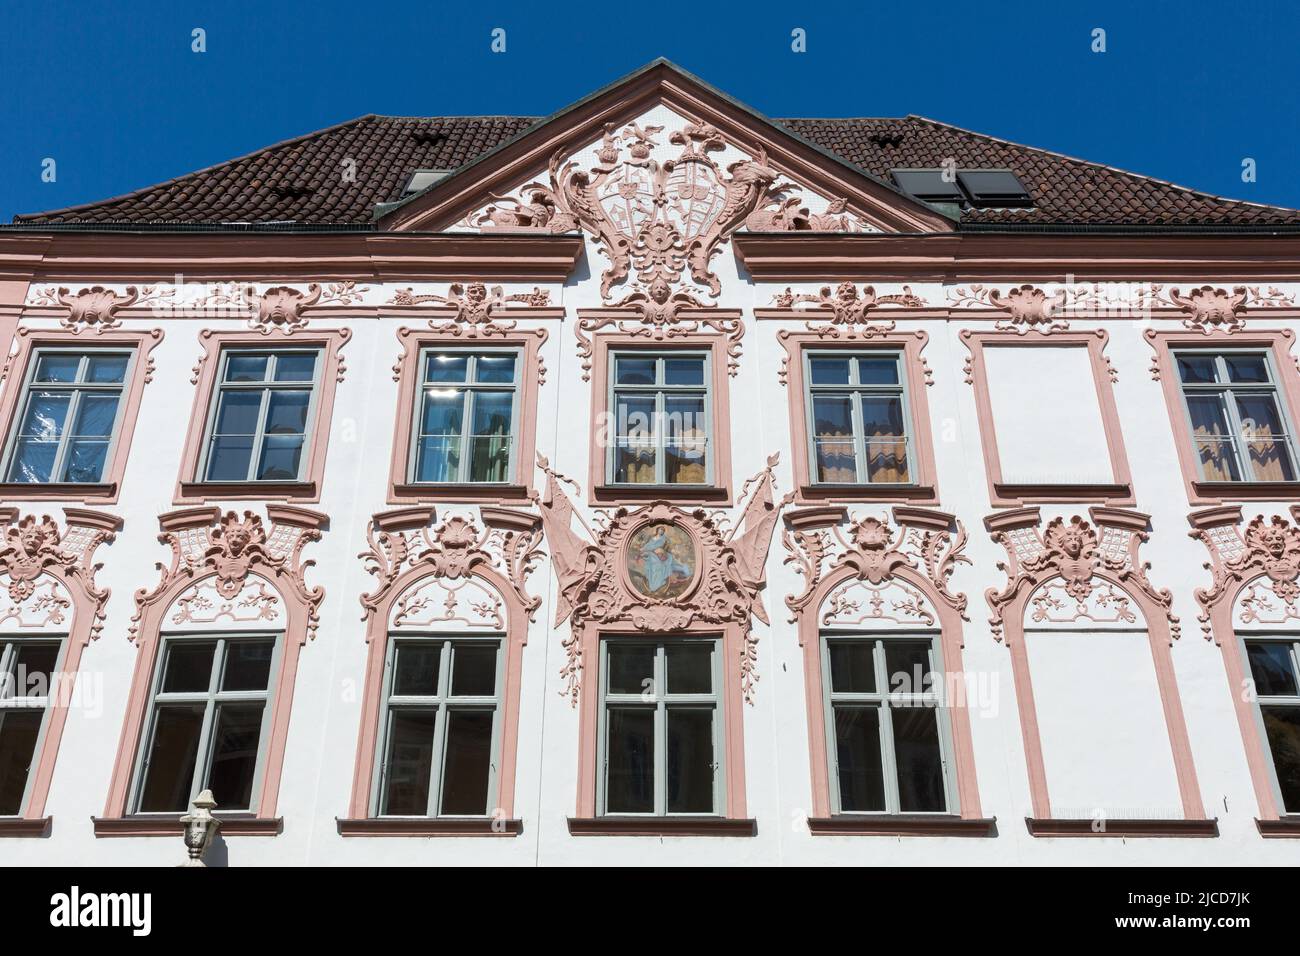 Landshut, Germany - Aug 14, 2021: Facade of a historical house in the old town (Ländgasse). Stock Photo